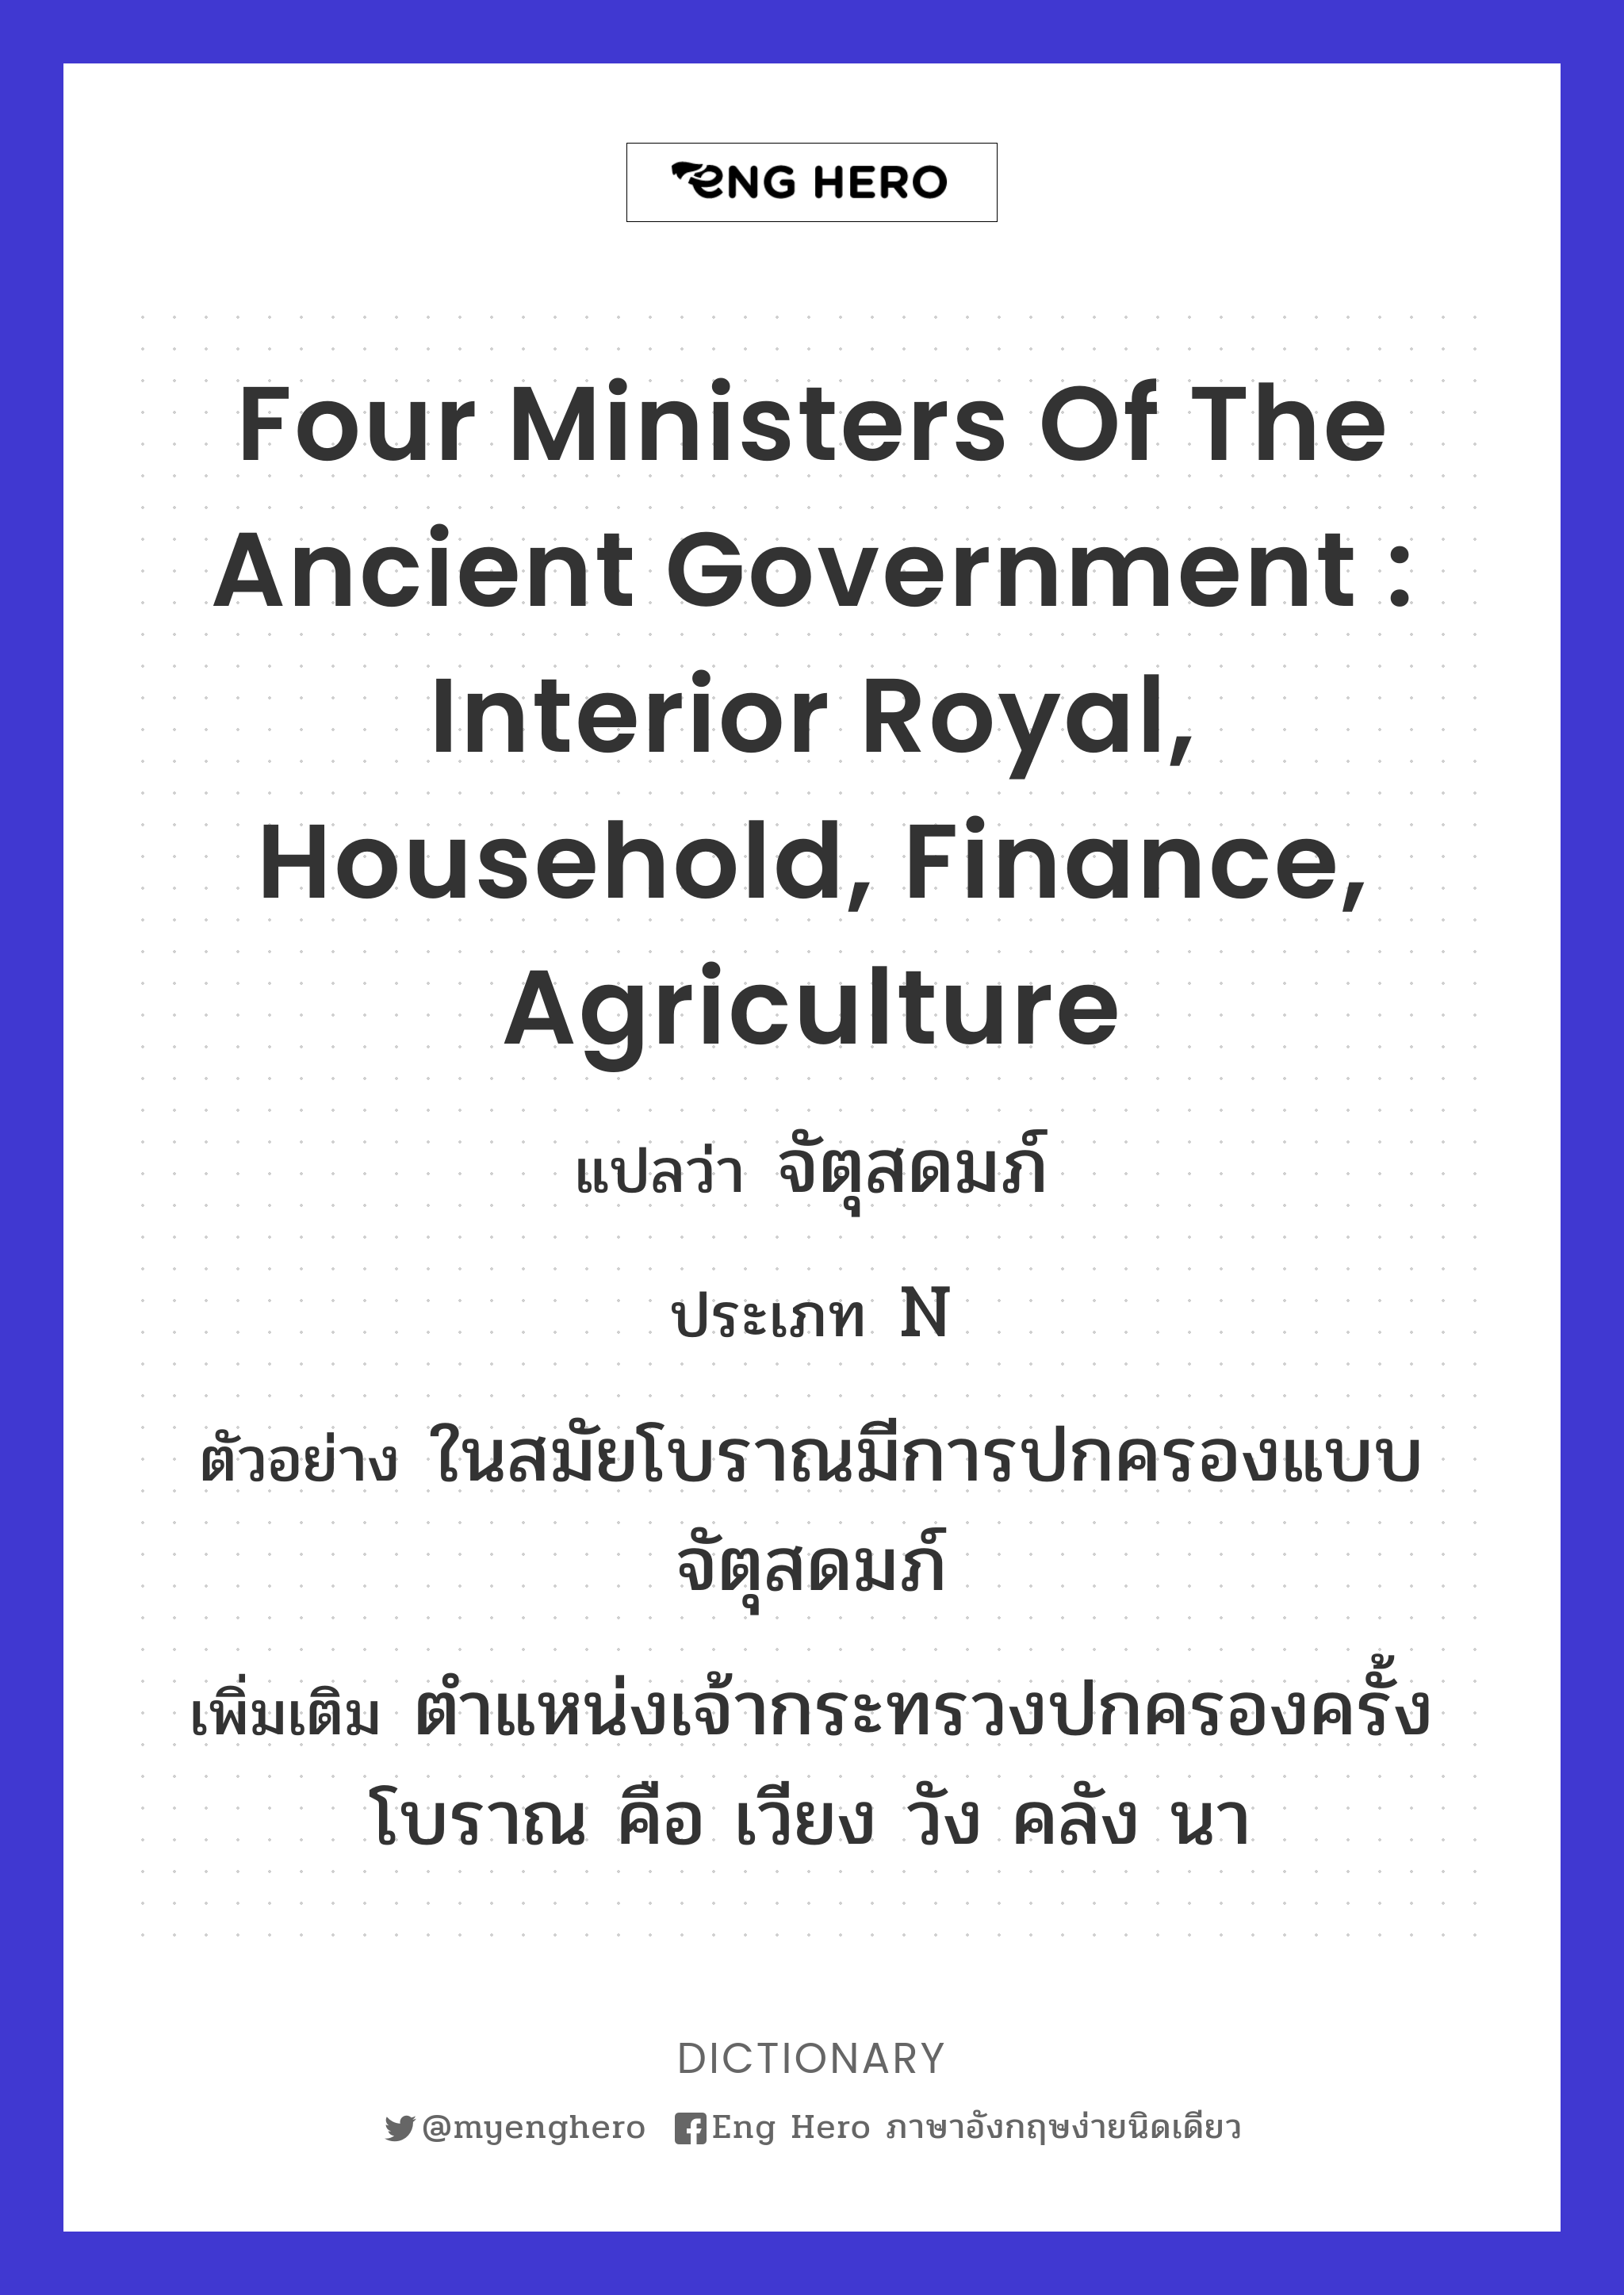 four ministers of the ancient government : Interior Royal, Household, Finance, Agriculture